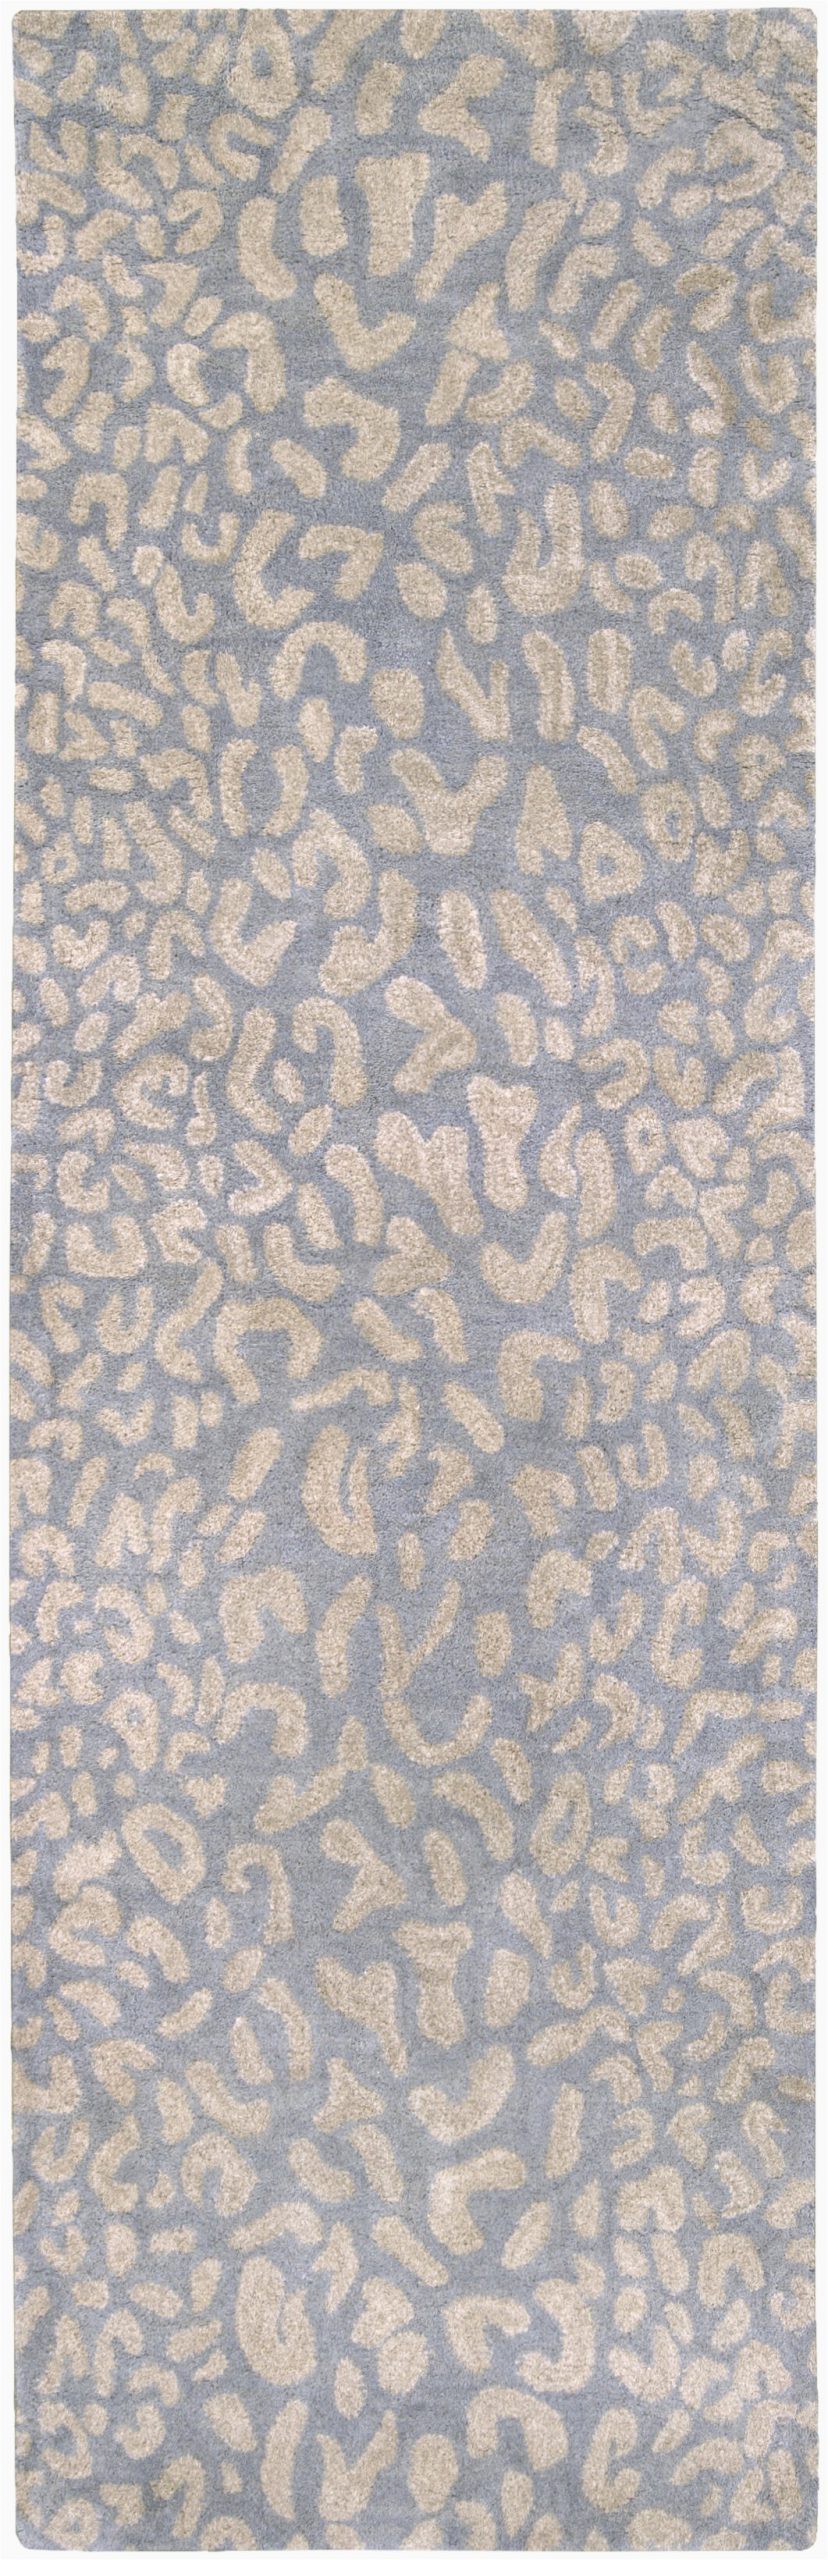 Leopard Print area Rug Target Animal Print area Rugs You Ll Love In 2020